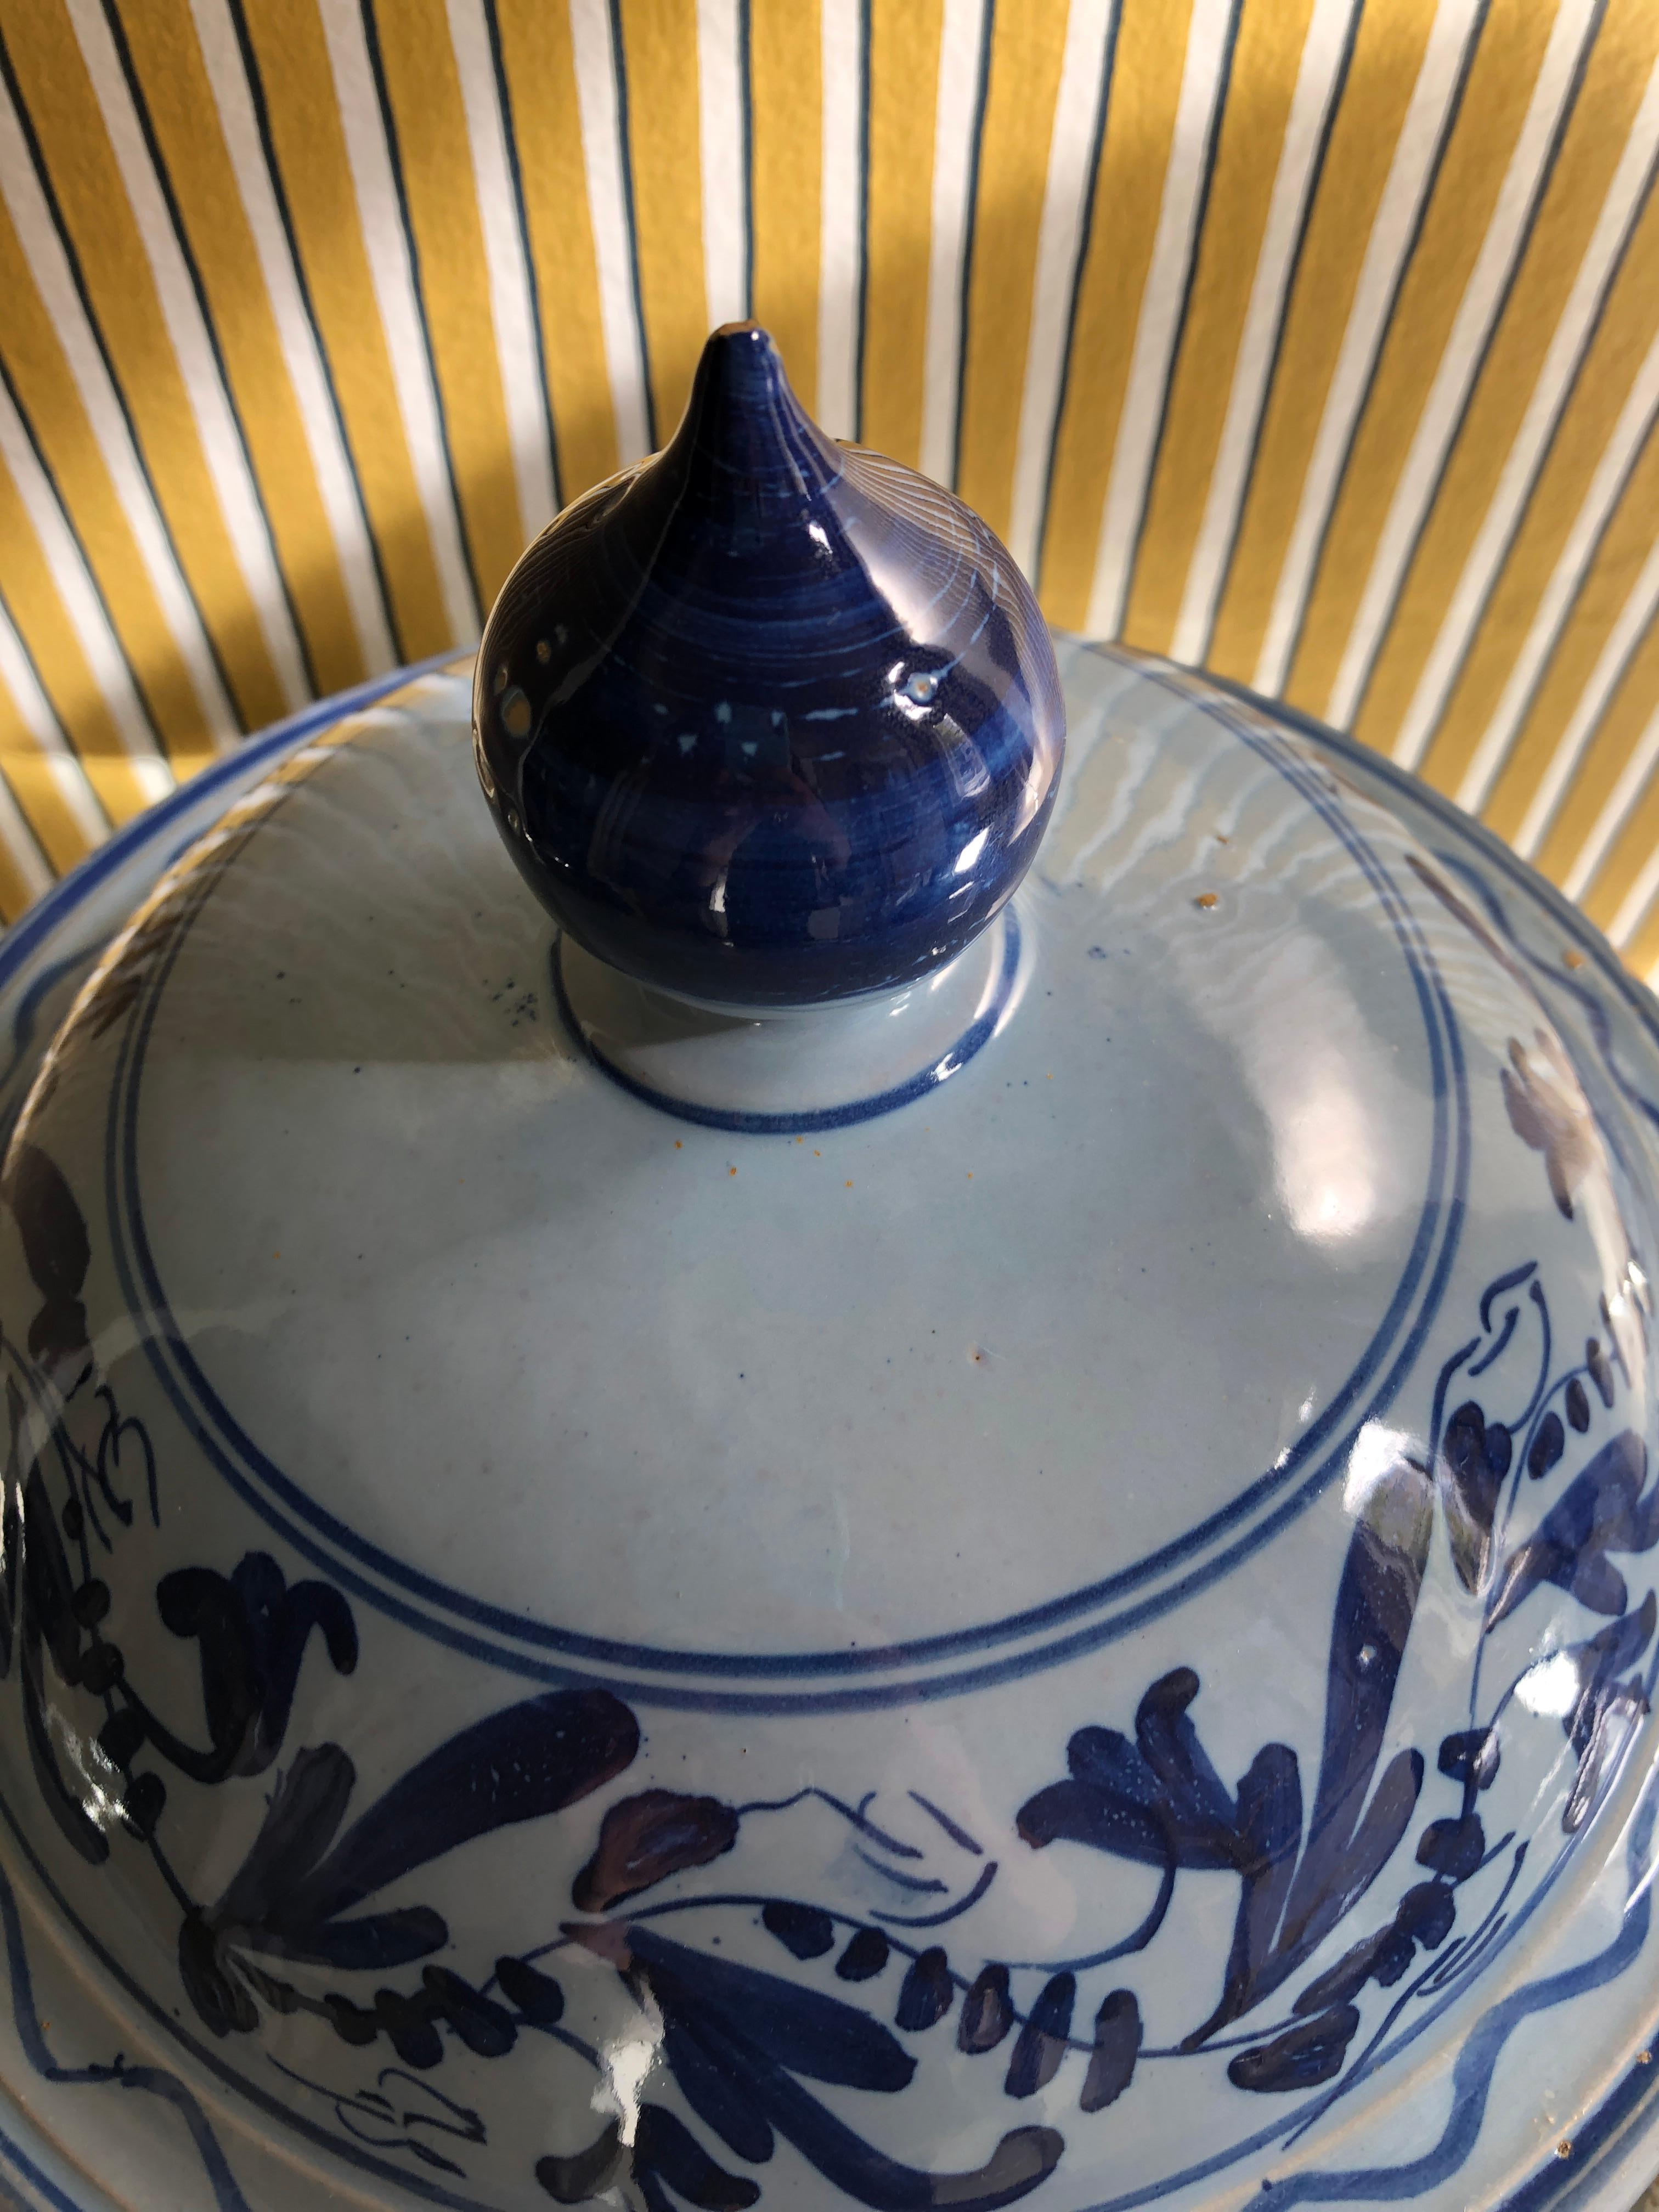 Vintage Ceramic Tureens with Blue Flower Decorations, Italy, Late 19th-Century 2